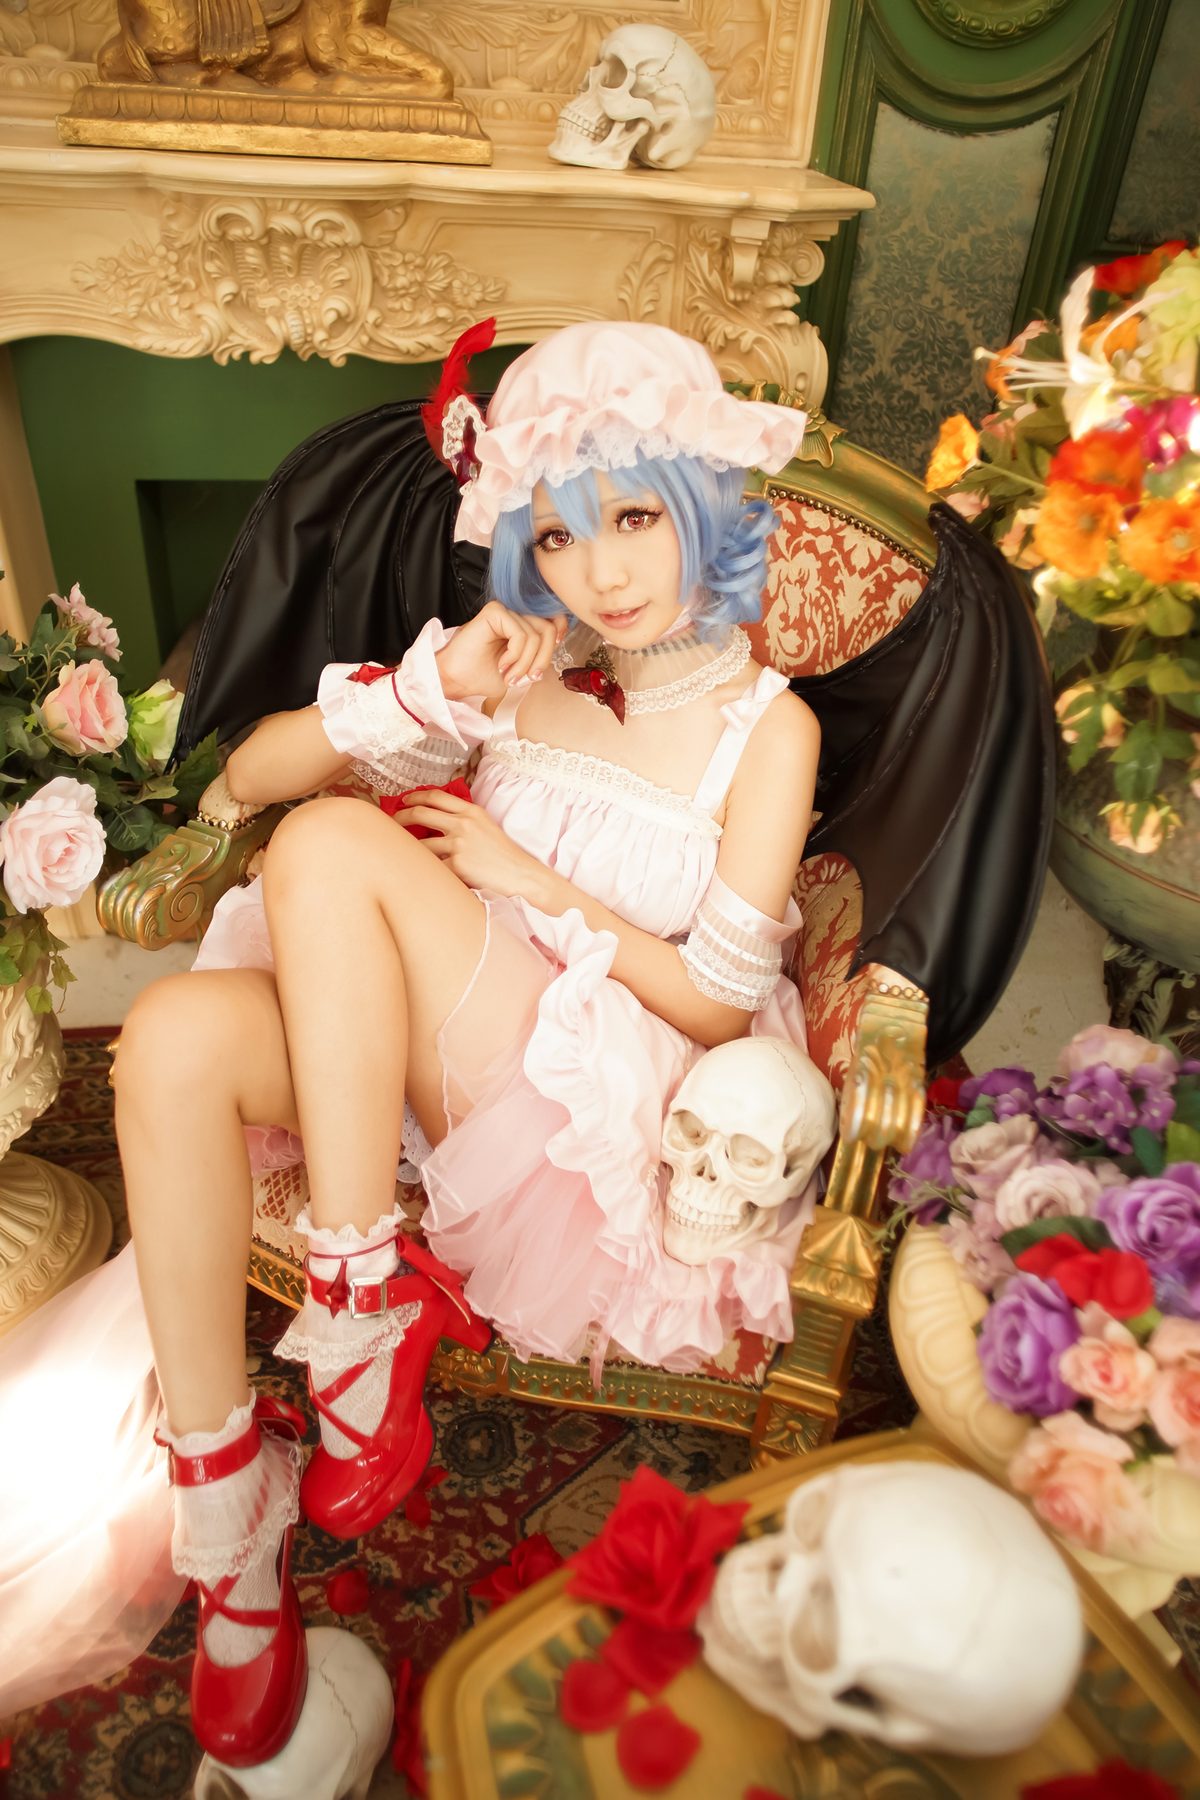 View - Coser@Ely_eee ElyEE子 - 蕾米莉亚·斯卡雷特 A - 